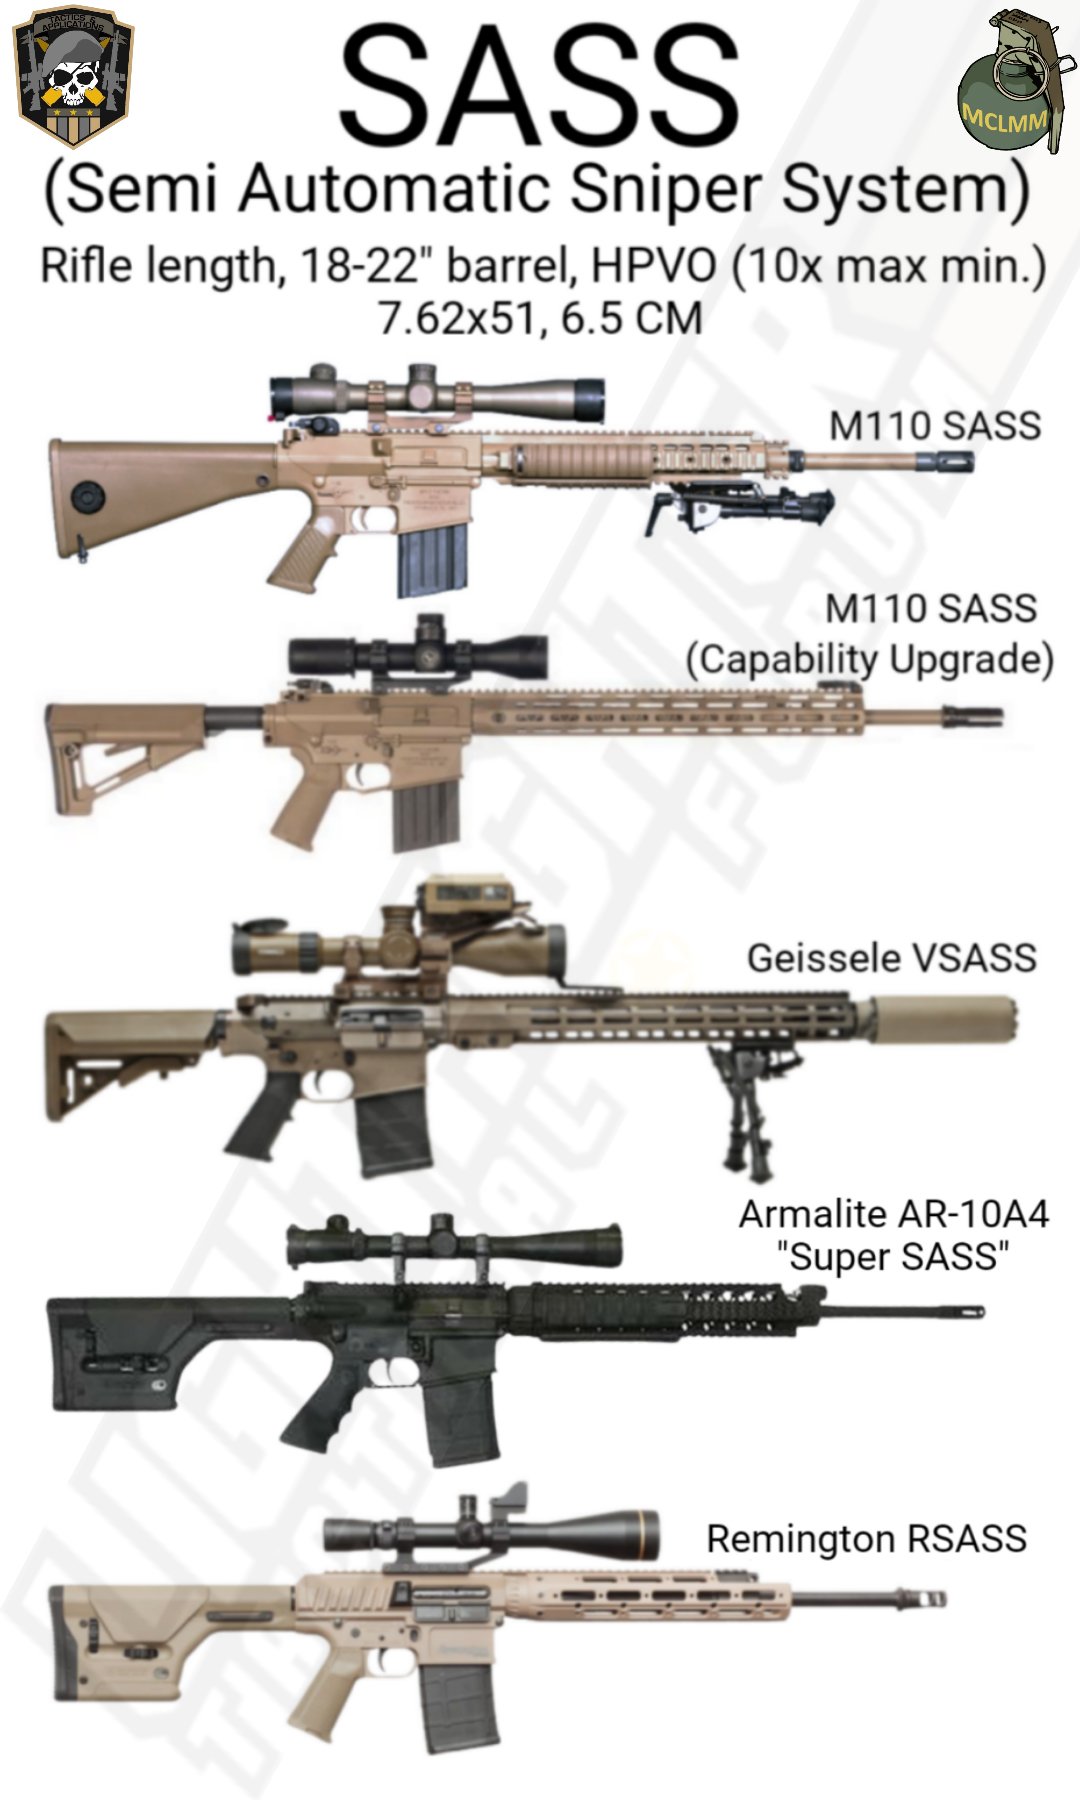 INSPIRED: Rifle Types for Regular Guys - Configuration Categories